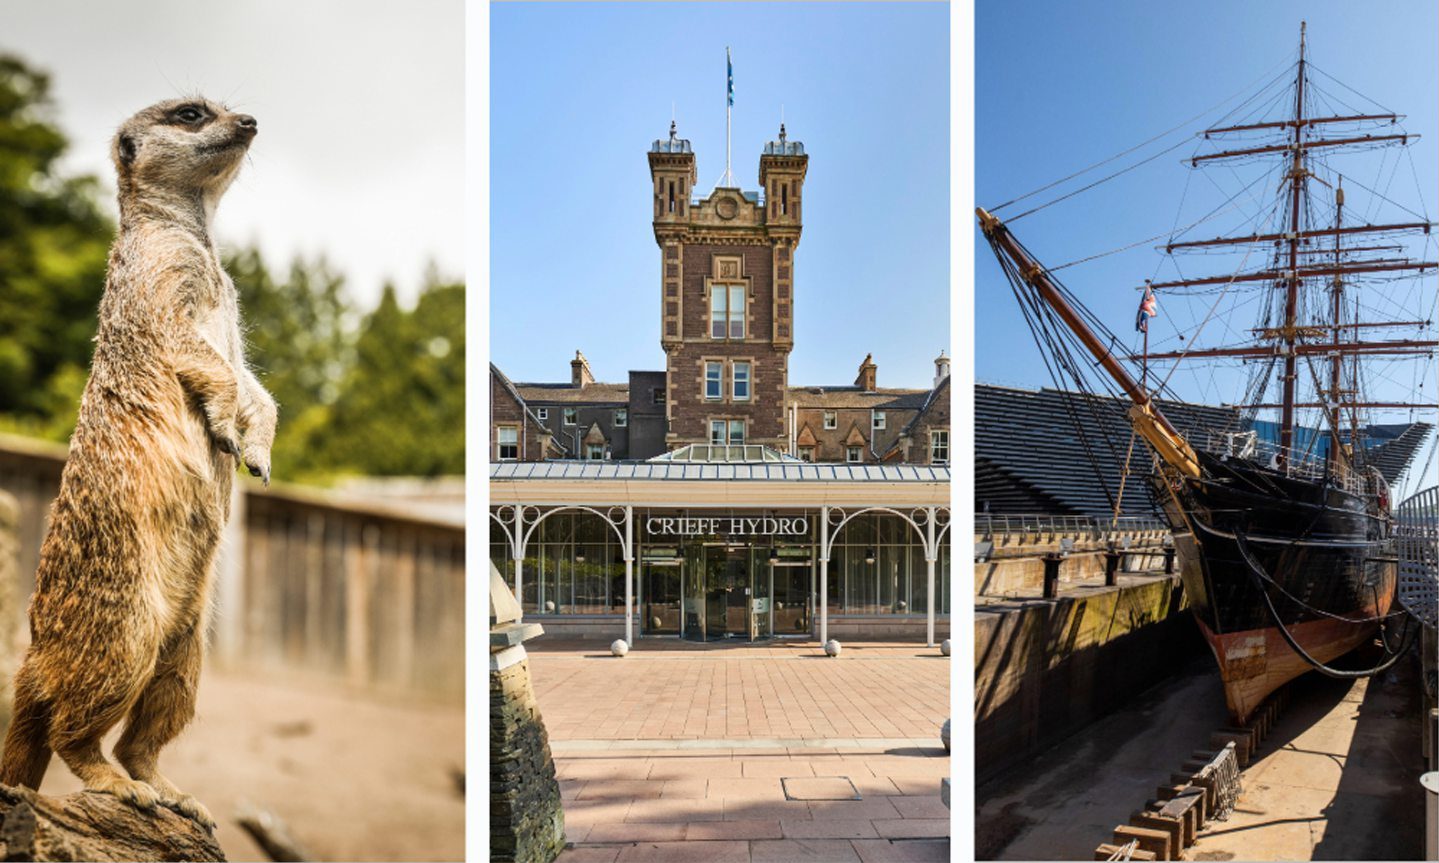 Camperdown Wildlife Park, Crieff Hydro Hotel and RRS Discovery.